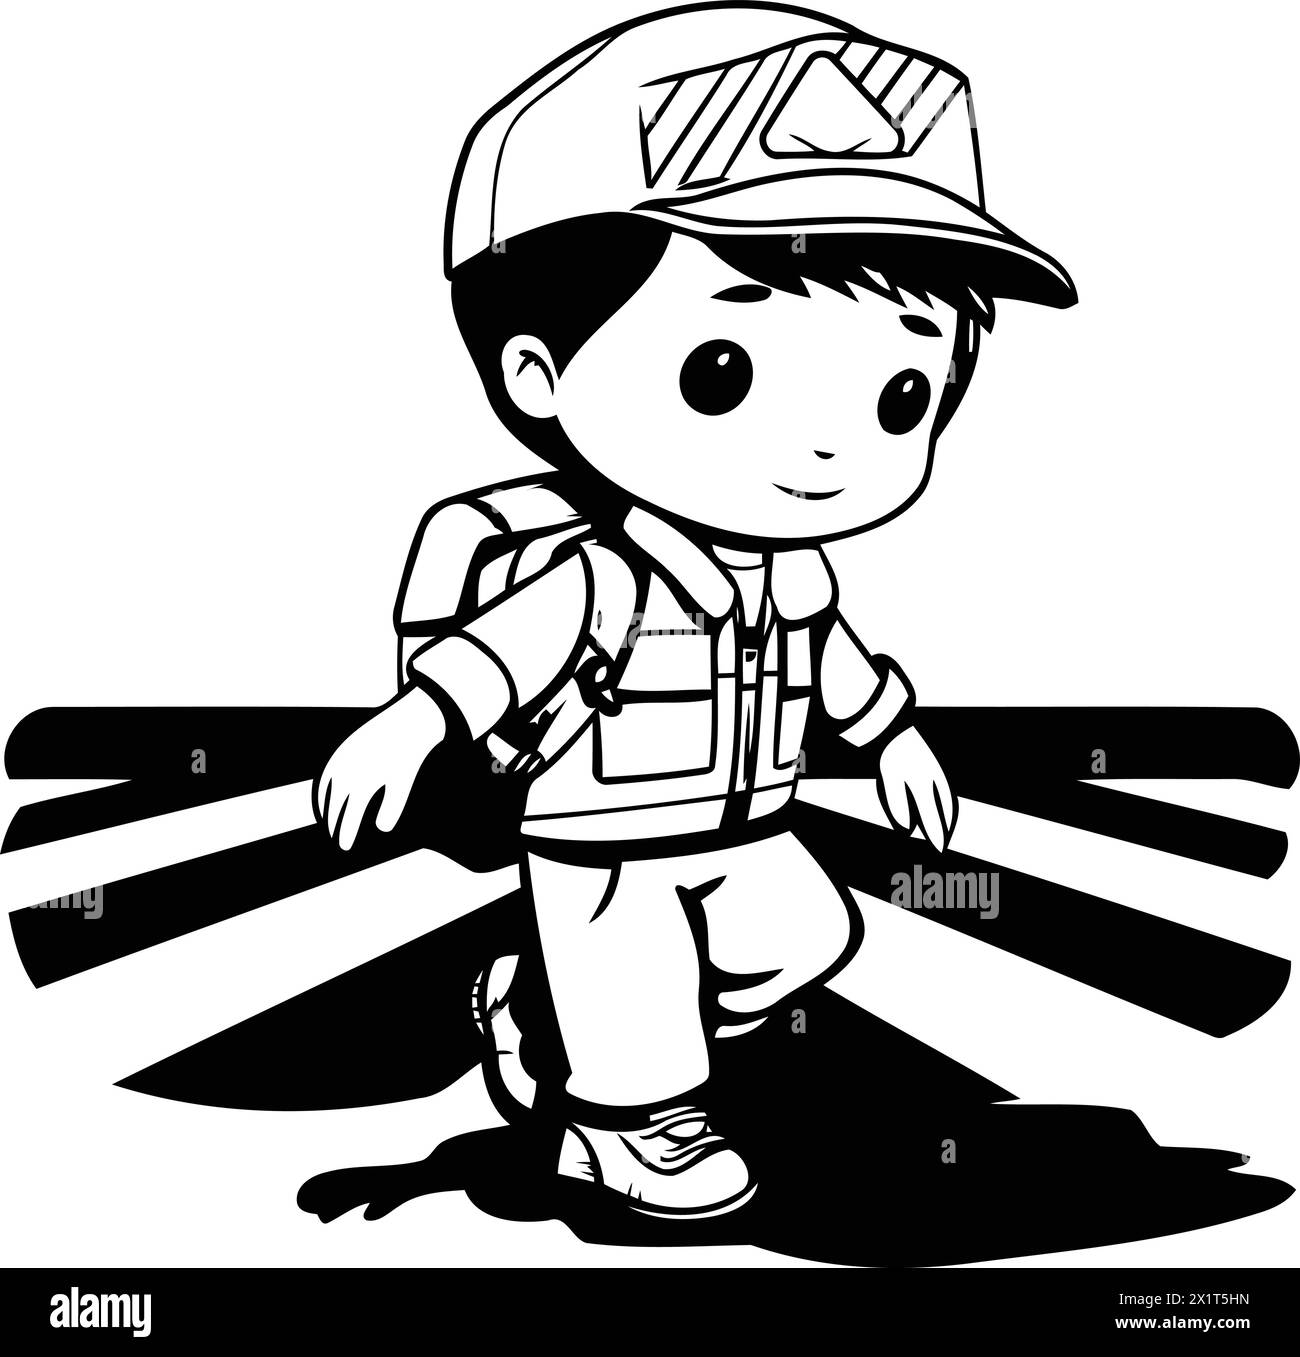 Illustration of a Little Boy Wearing a Safety Helmet and a Backpack Stock Vector